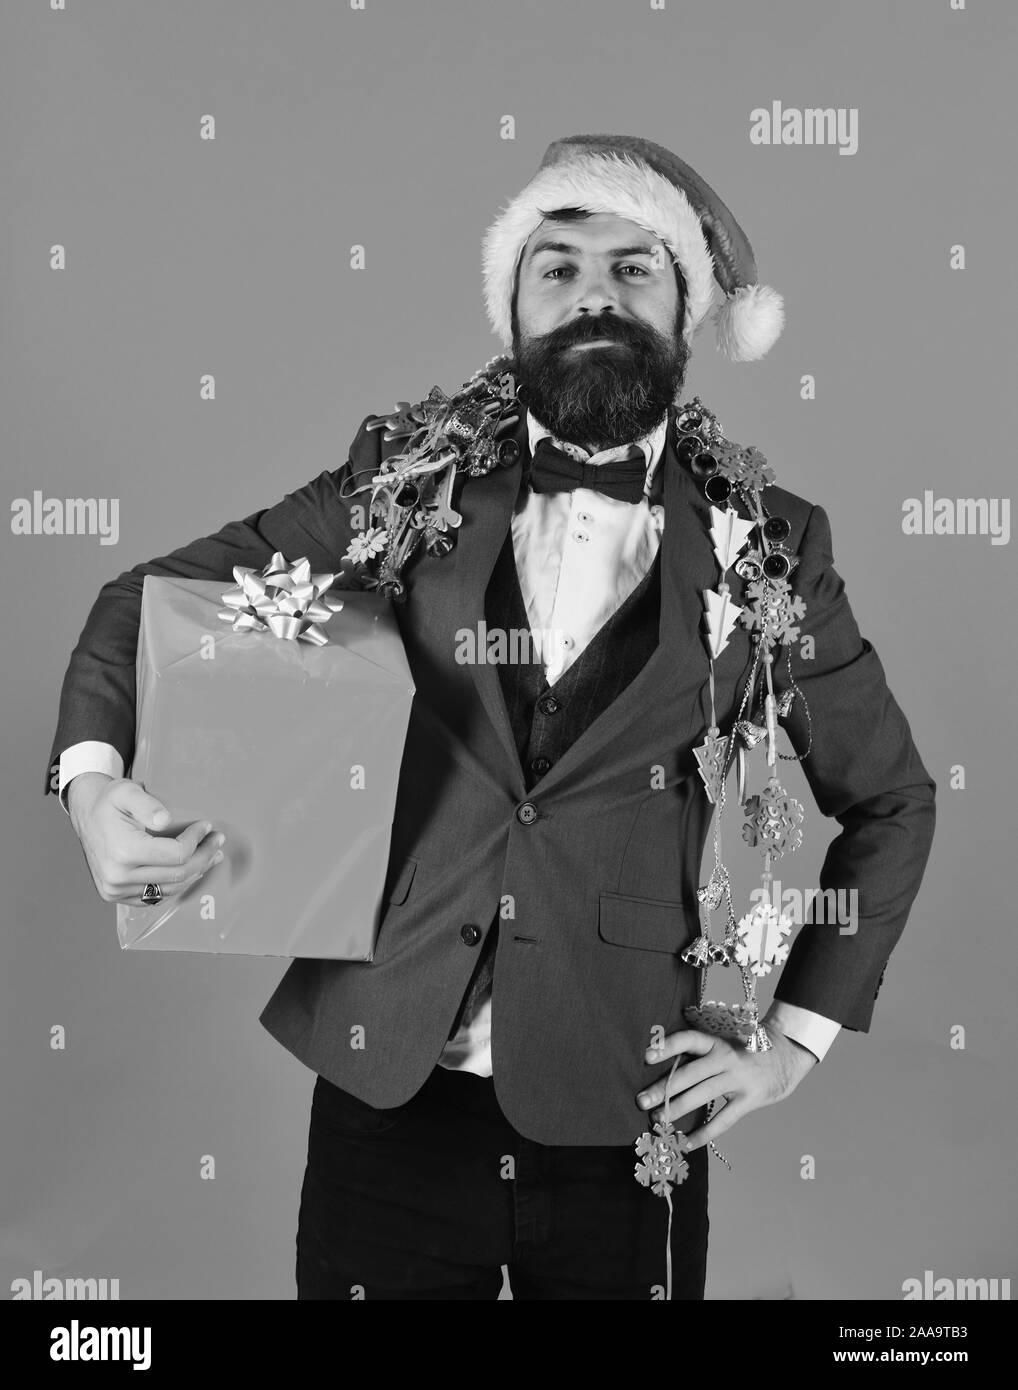 Manager with beard holds red gift. Man in smart suit, Santa hat and garlands on blue background. Businessman with proud face holds present box and decorations. Business and celebration concept. Stock Photo